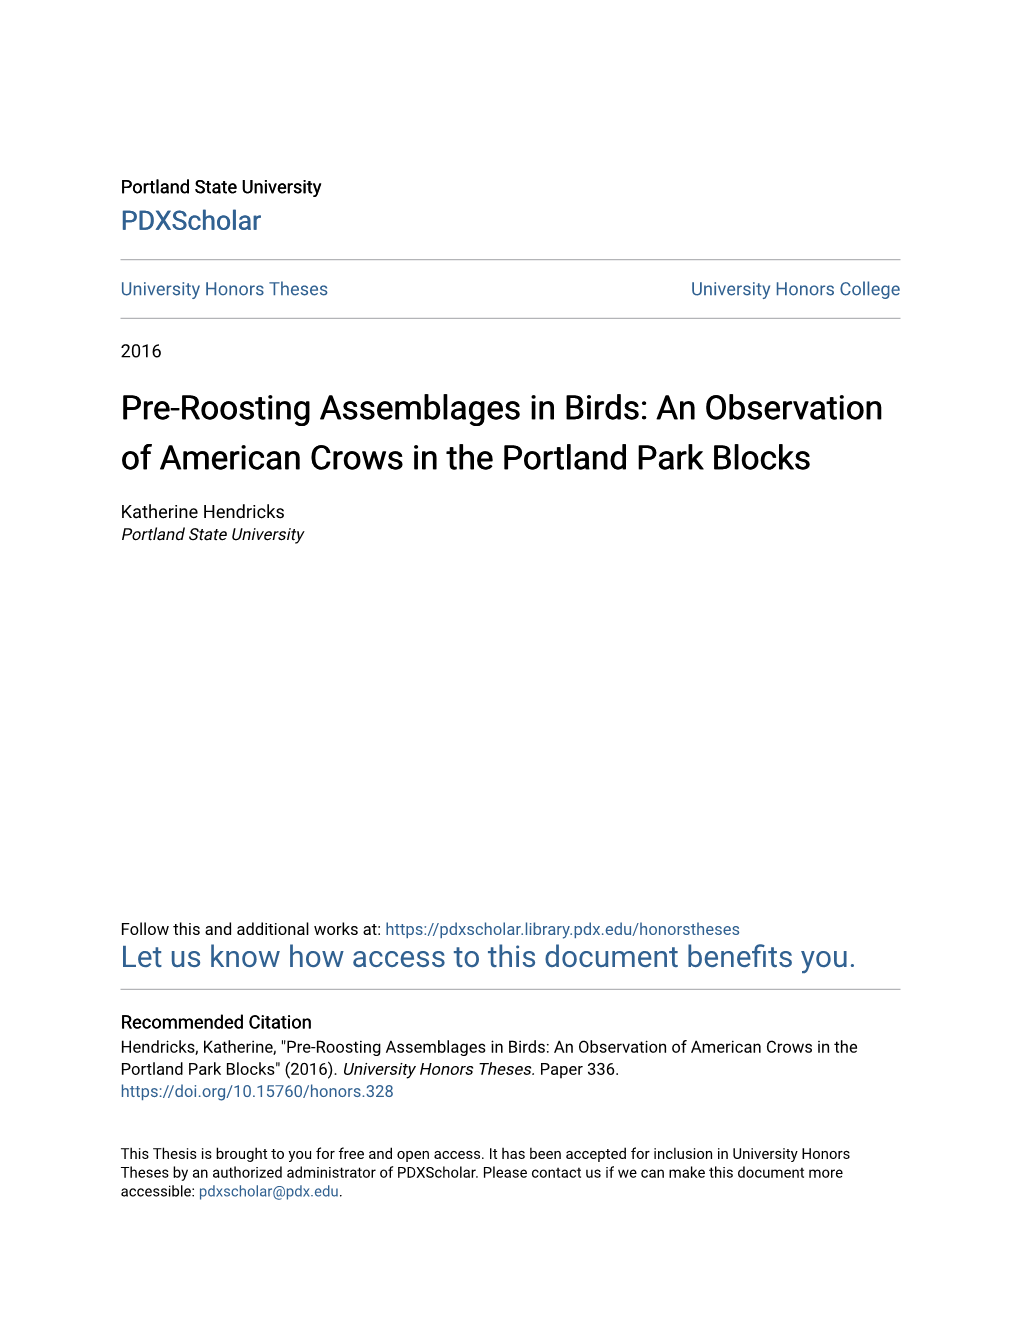 Pre-Roosting Assemblages in Birds: an Observation of American Crows in the Portland Park Blocks